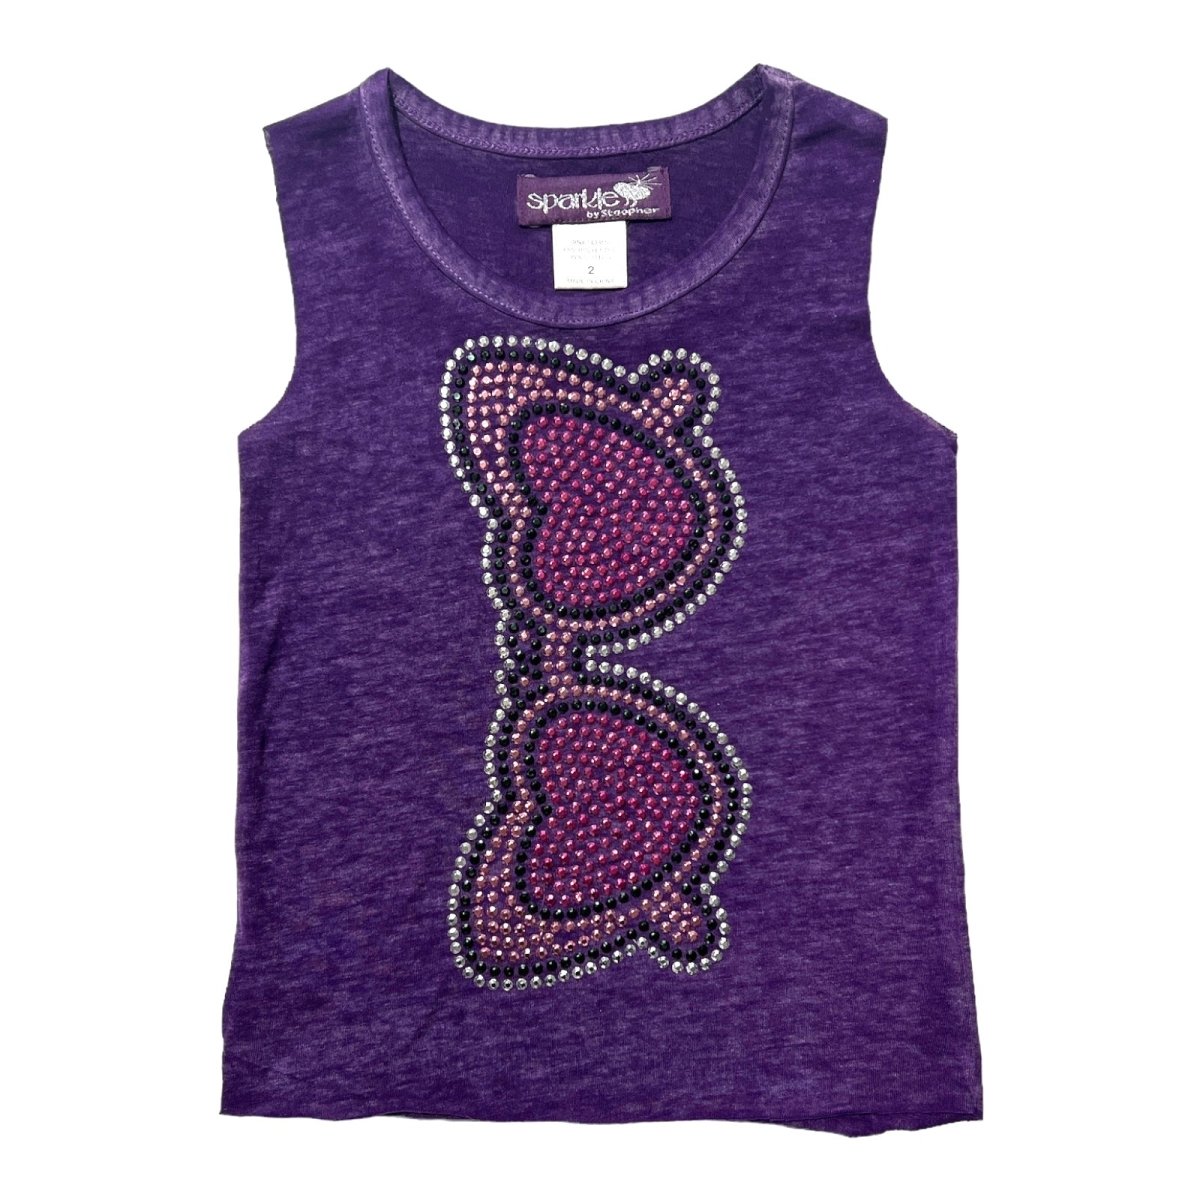 HEARTS SUNGLASSES TANK TOP - SPARKLE BY STOOPHER